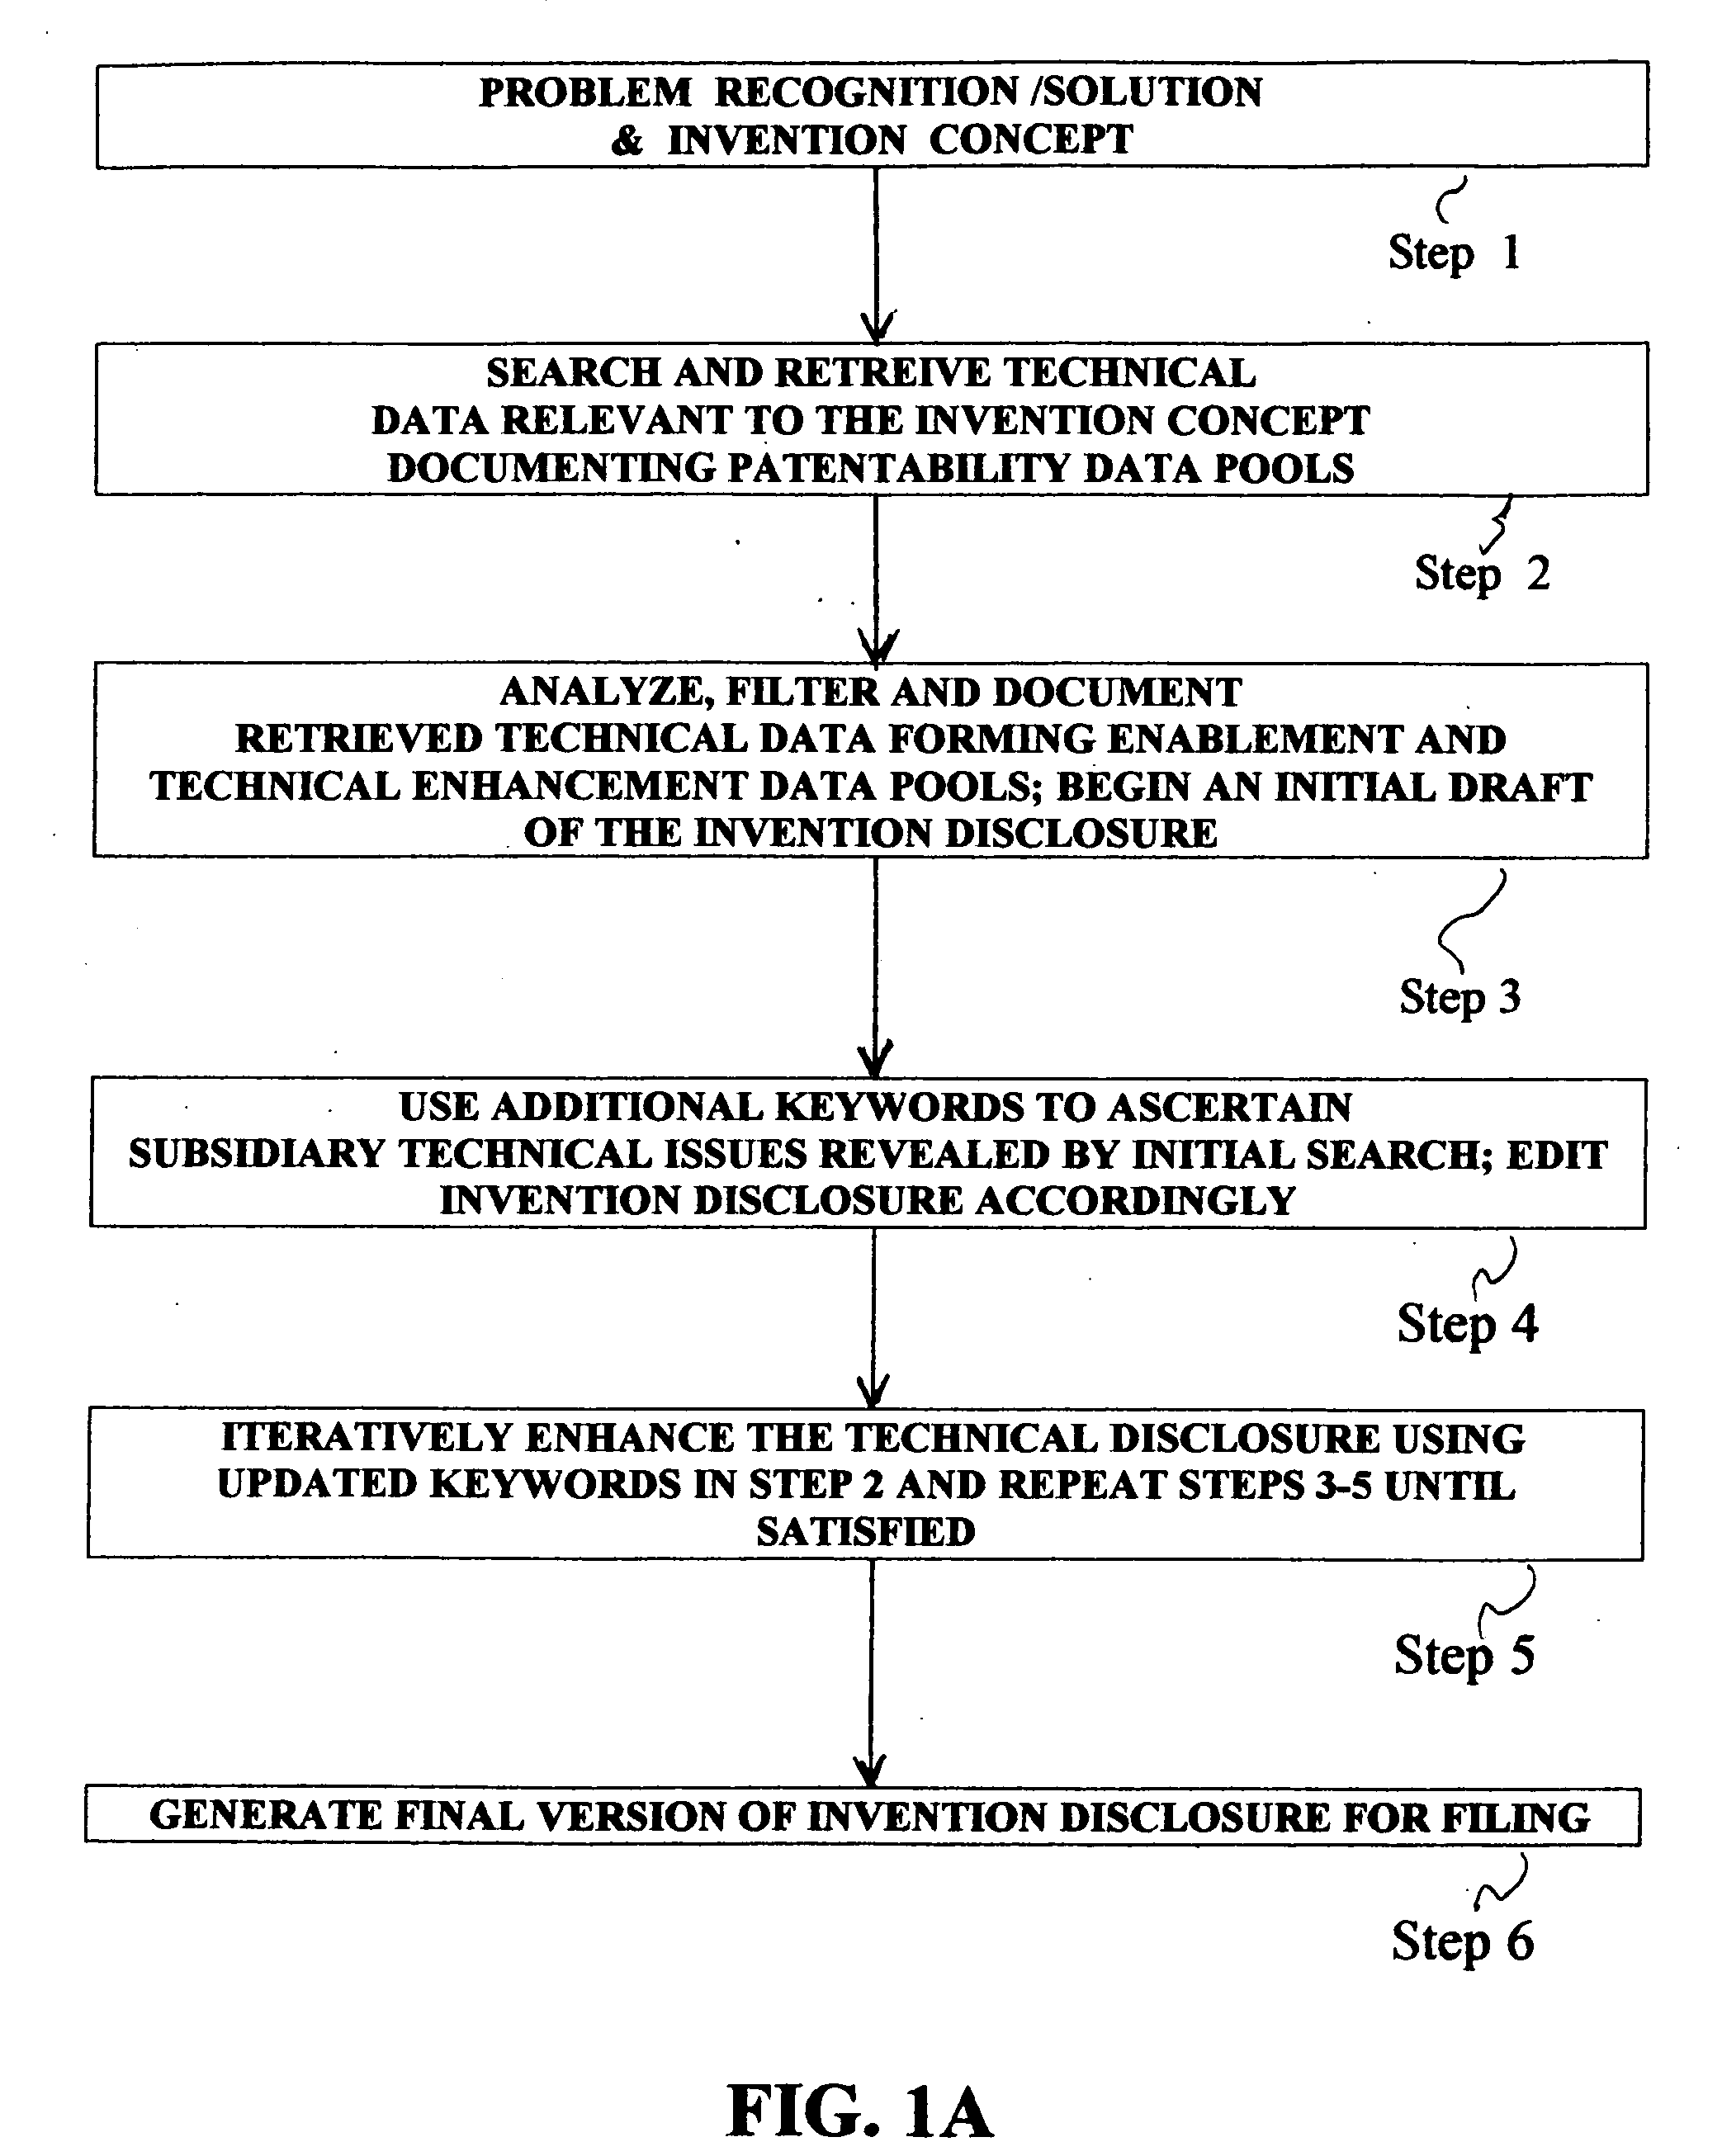 Synthesis-based approach to draft an invention disclosure using improved prior art search technique